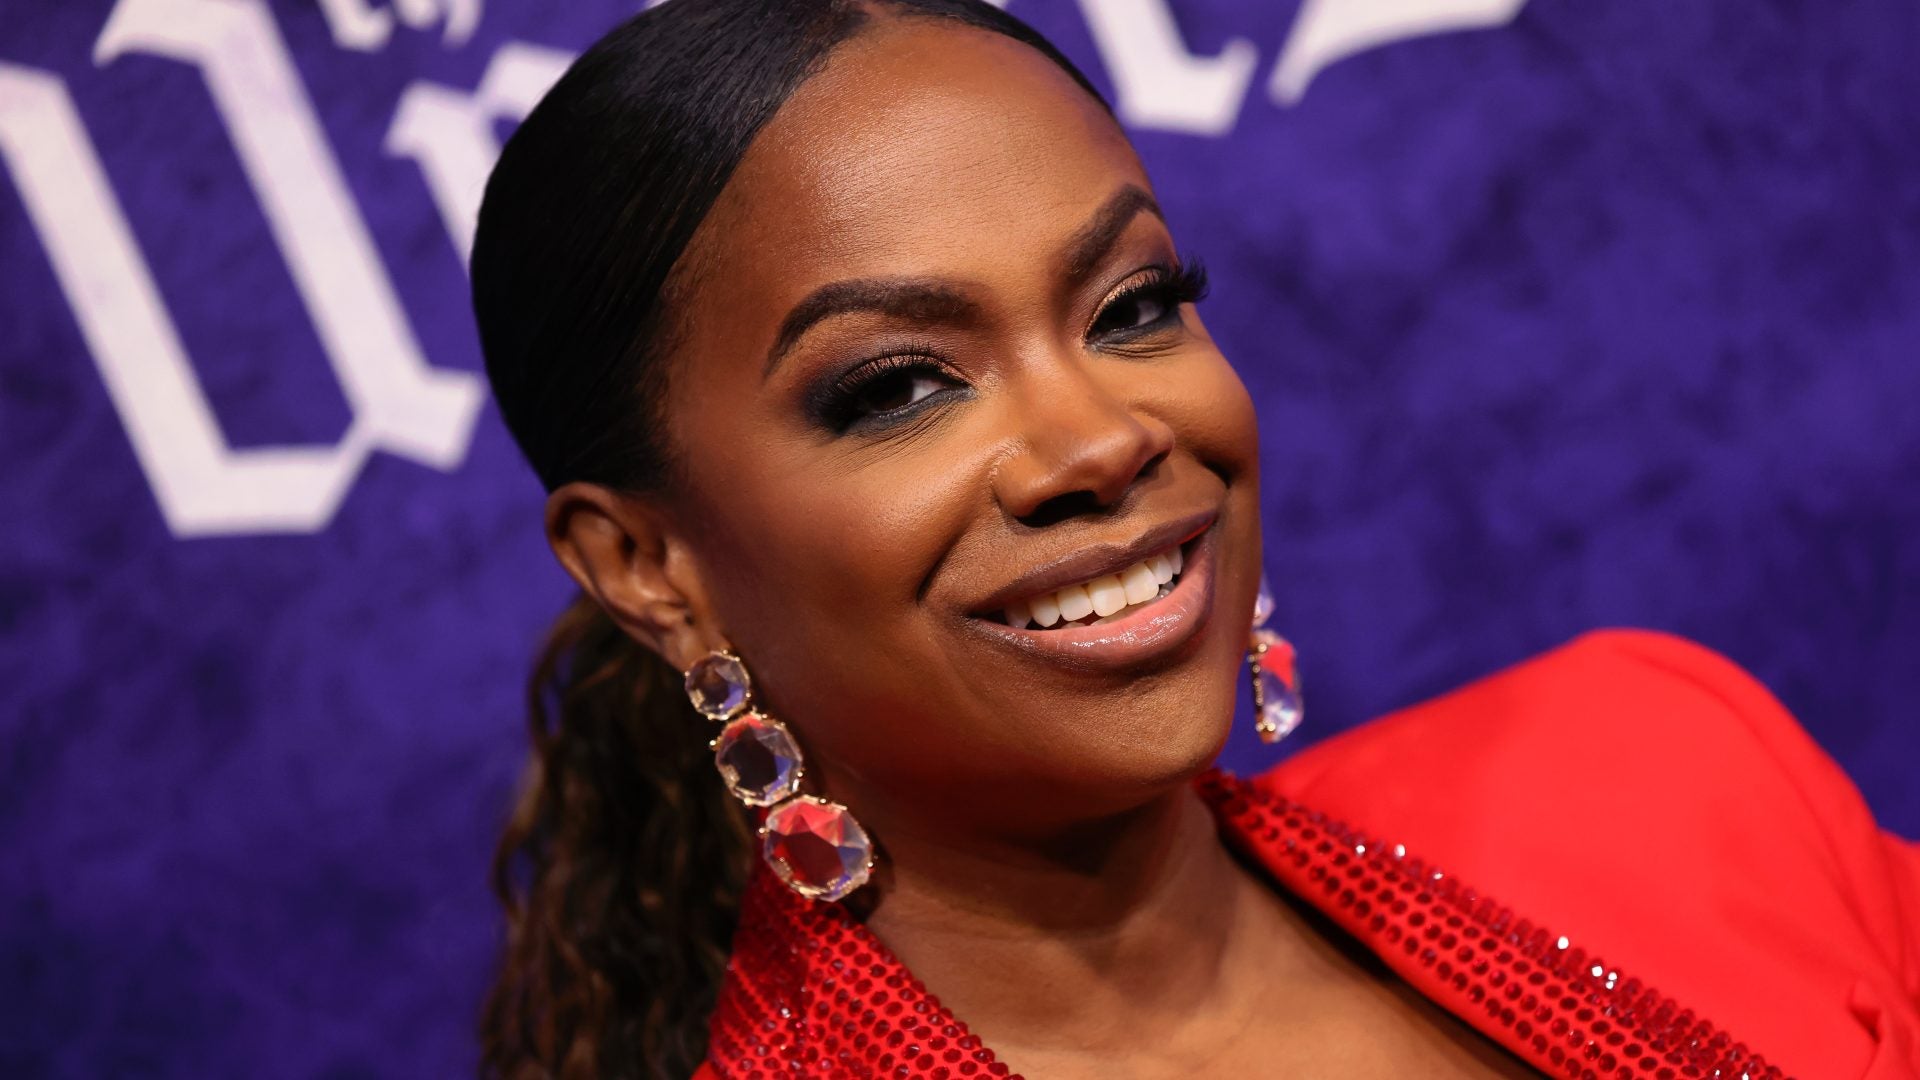 Kandi Burruss Says Having More Time For Family Behind RHOA Exit: 'I Was Doing Real Mommy Duties And I Was Loving It'